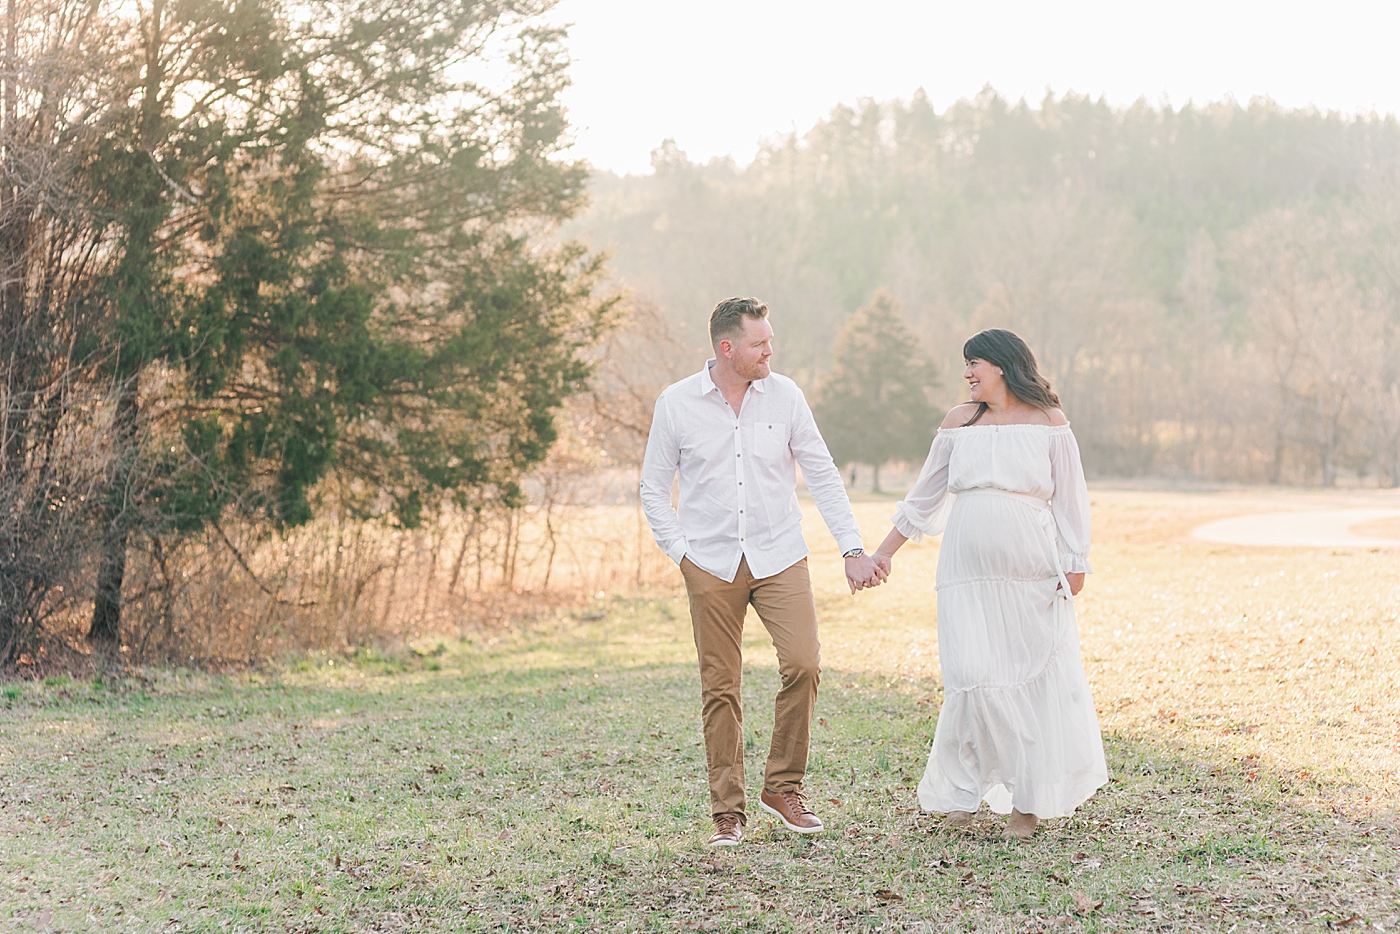 Dad and mom to be walking in a field holding hands for maternity session | Photo by Anna Wisjo Photography